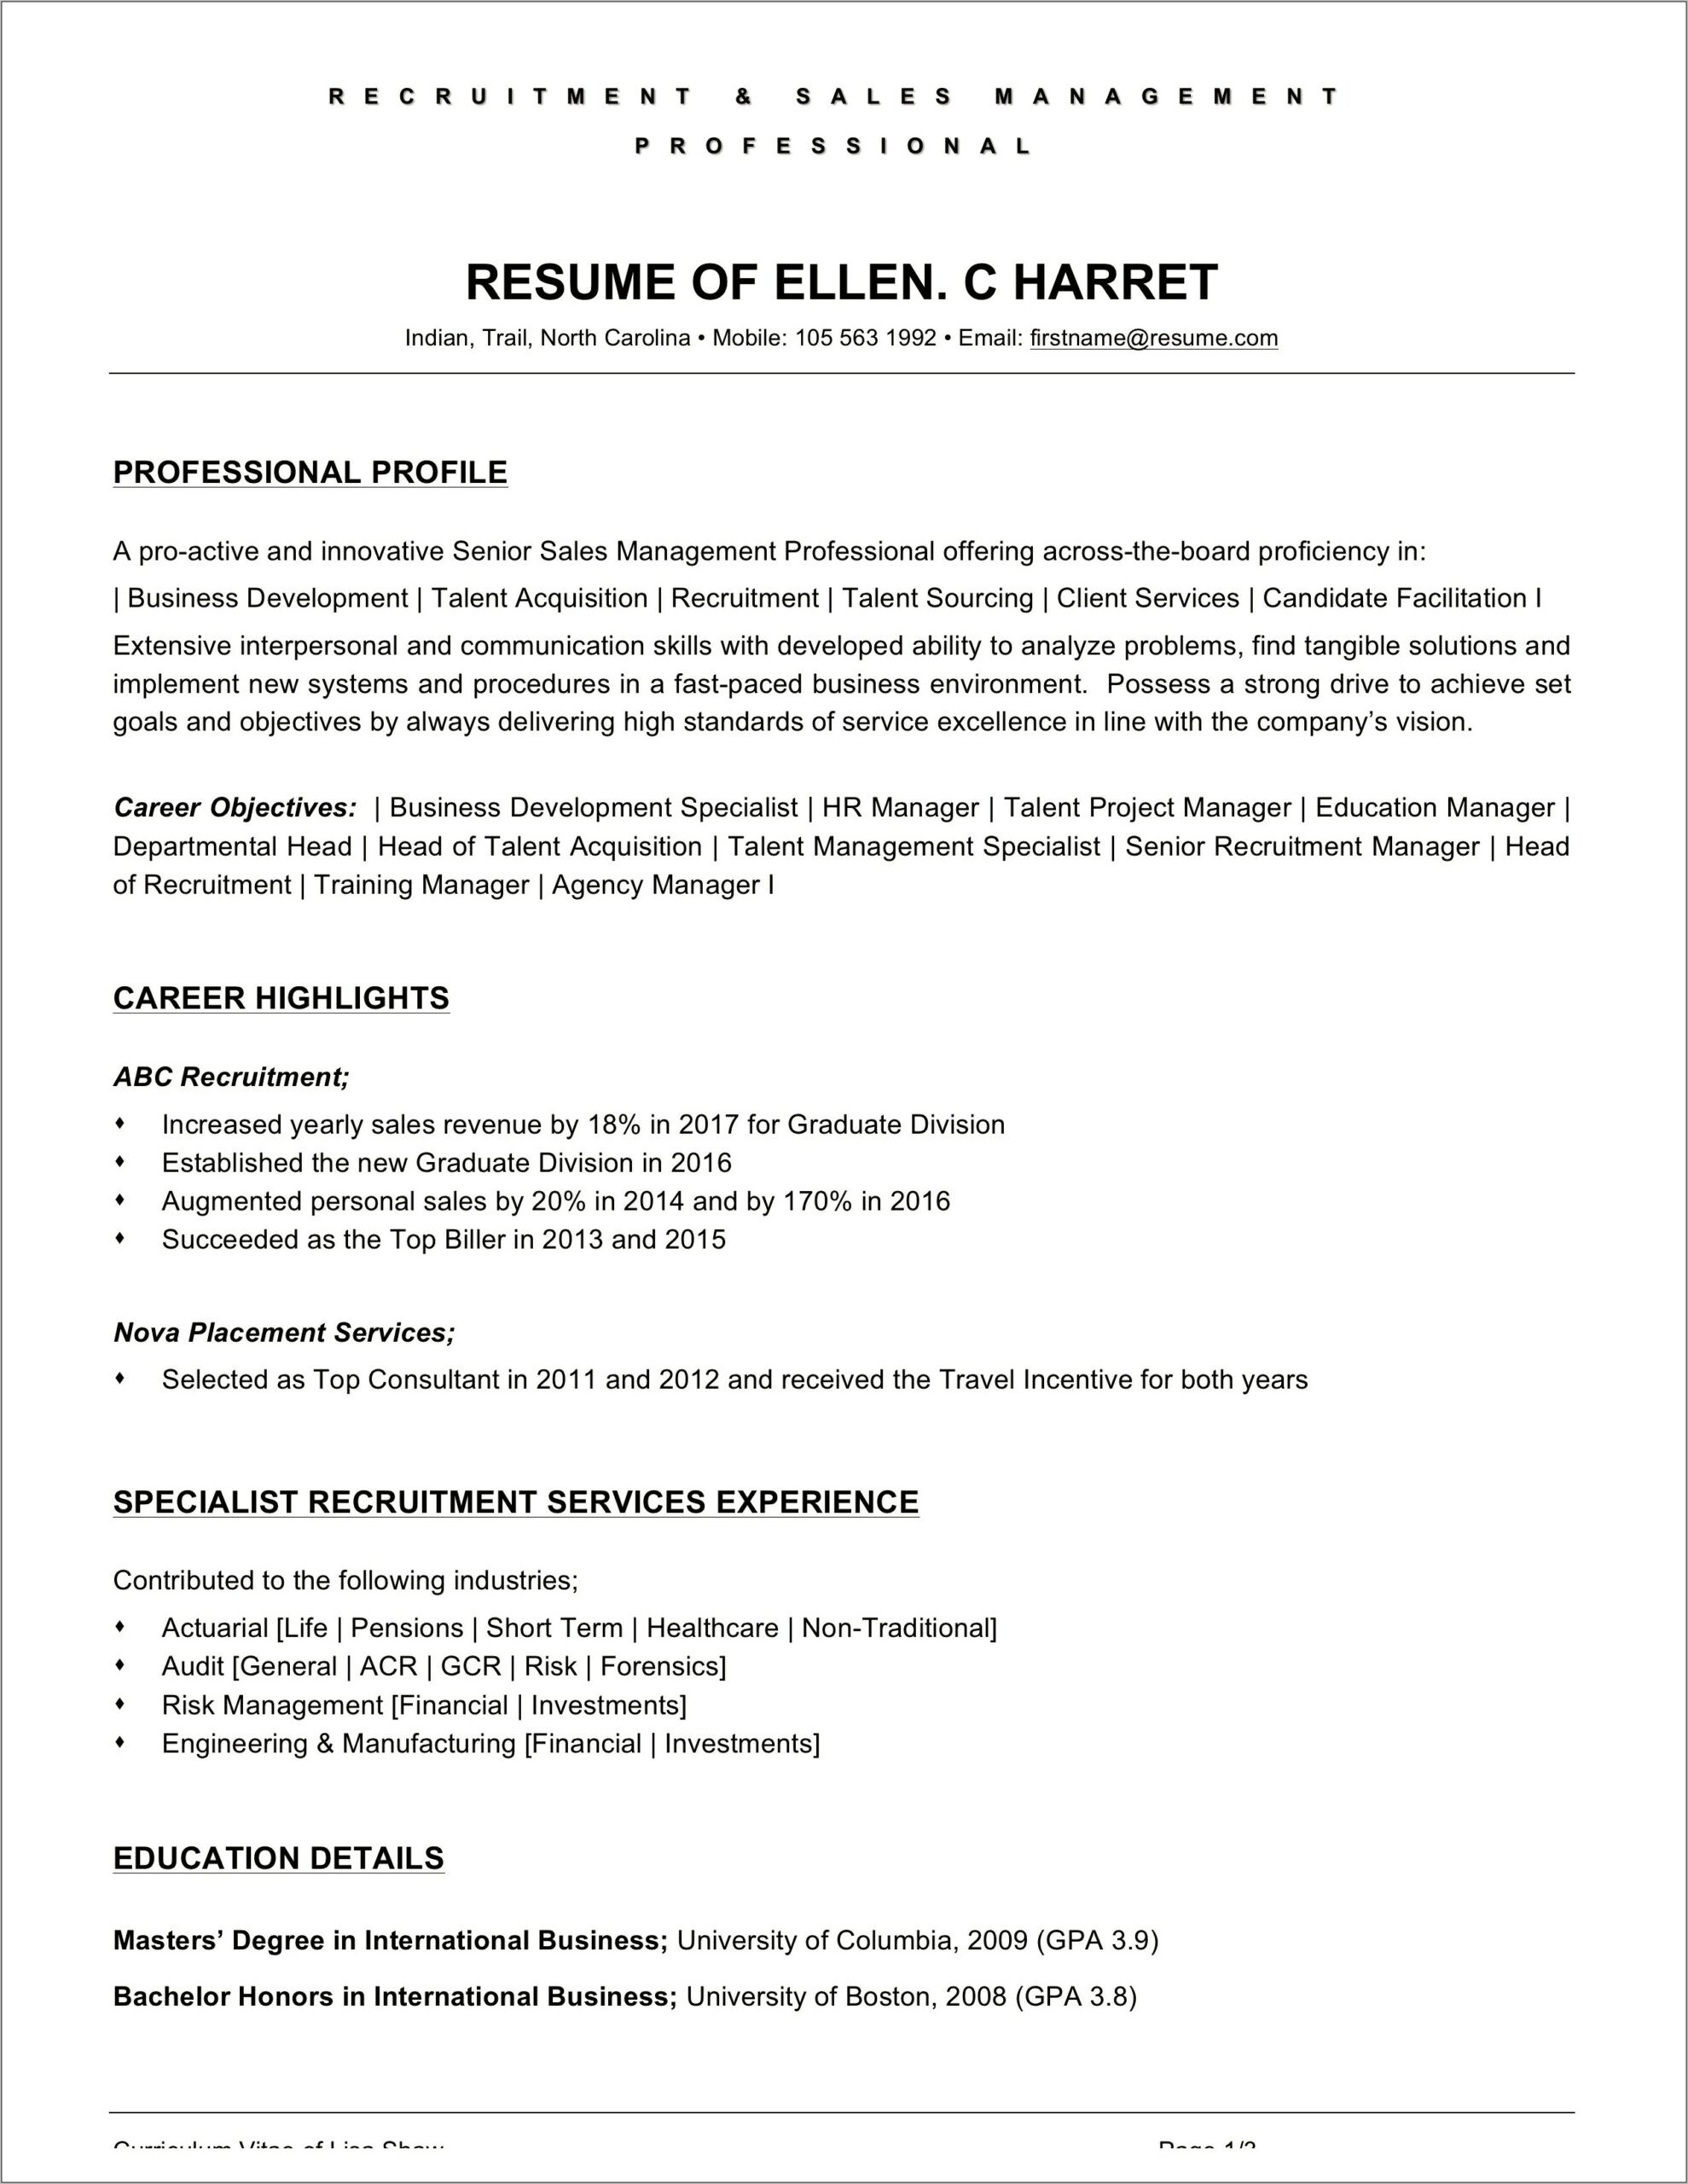 Business Development Executive Resume Samples Jobherojobhero assistant Manager Objectives Resume Samples – Resume Example Gallery